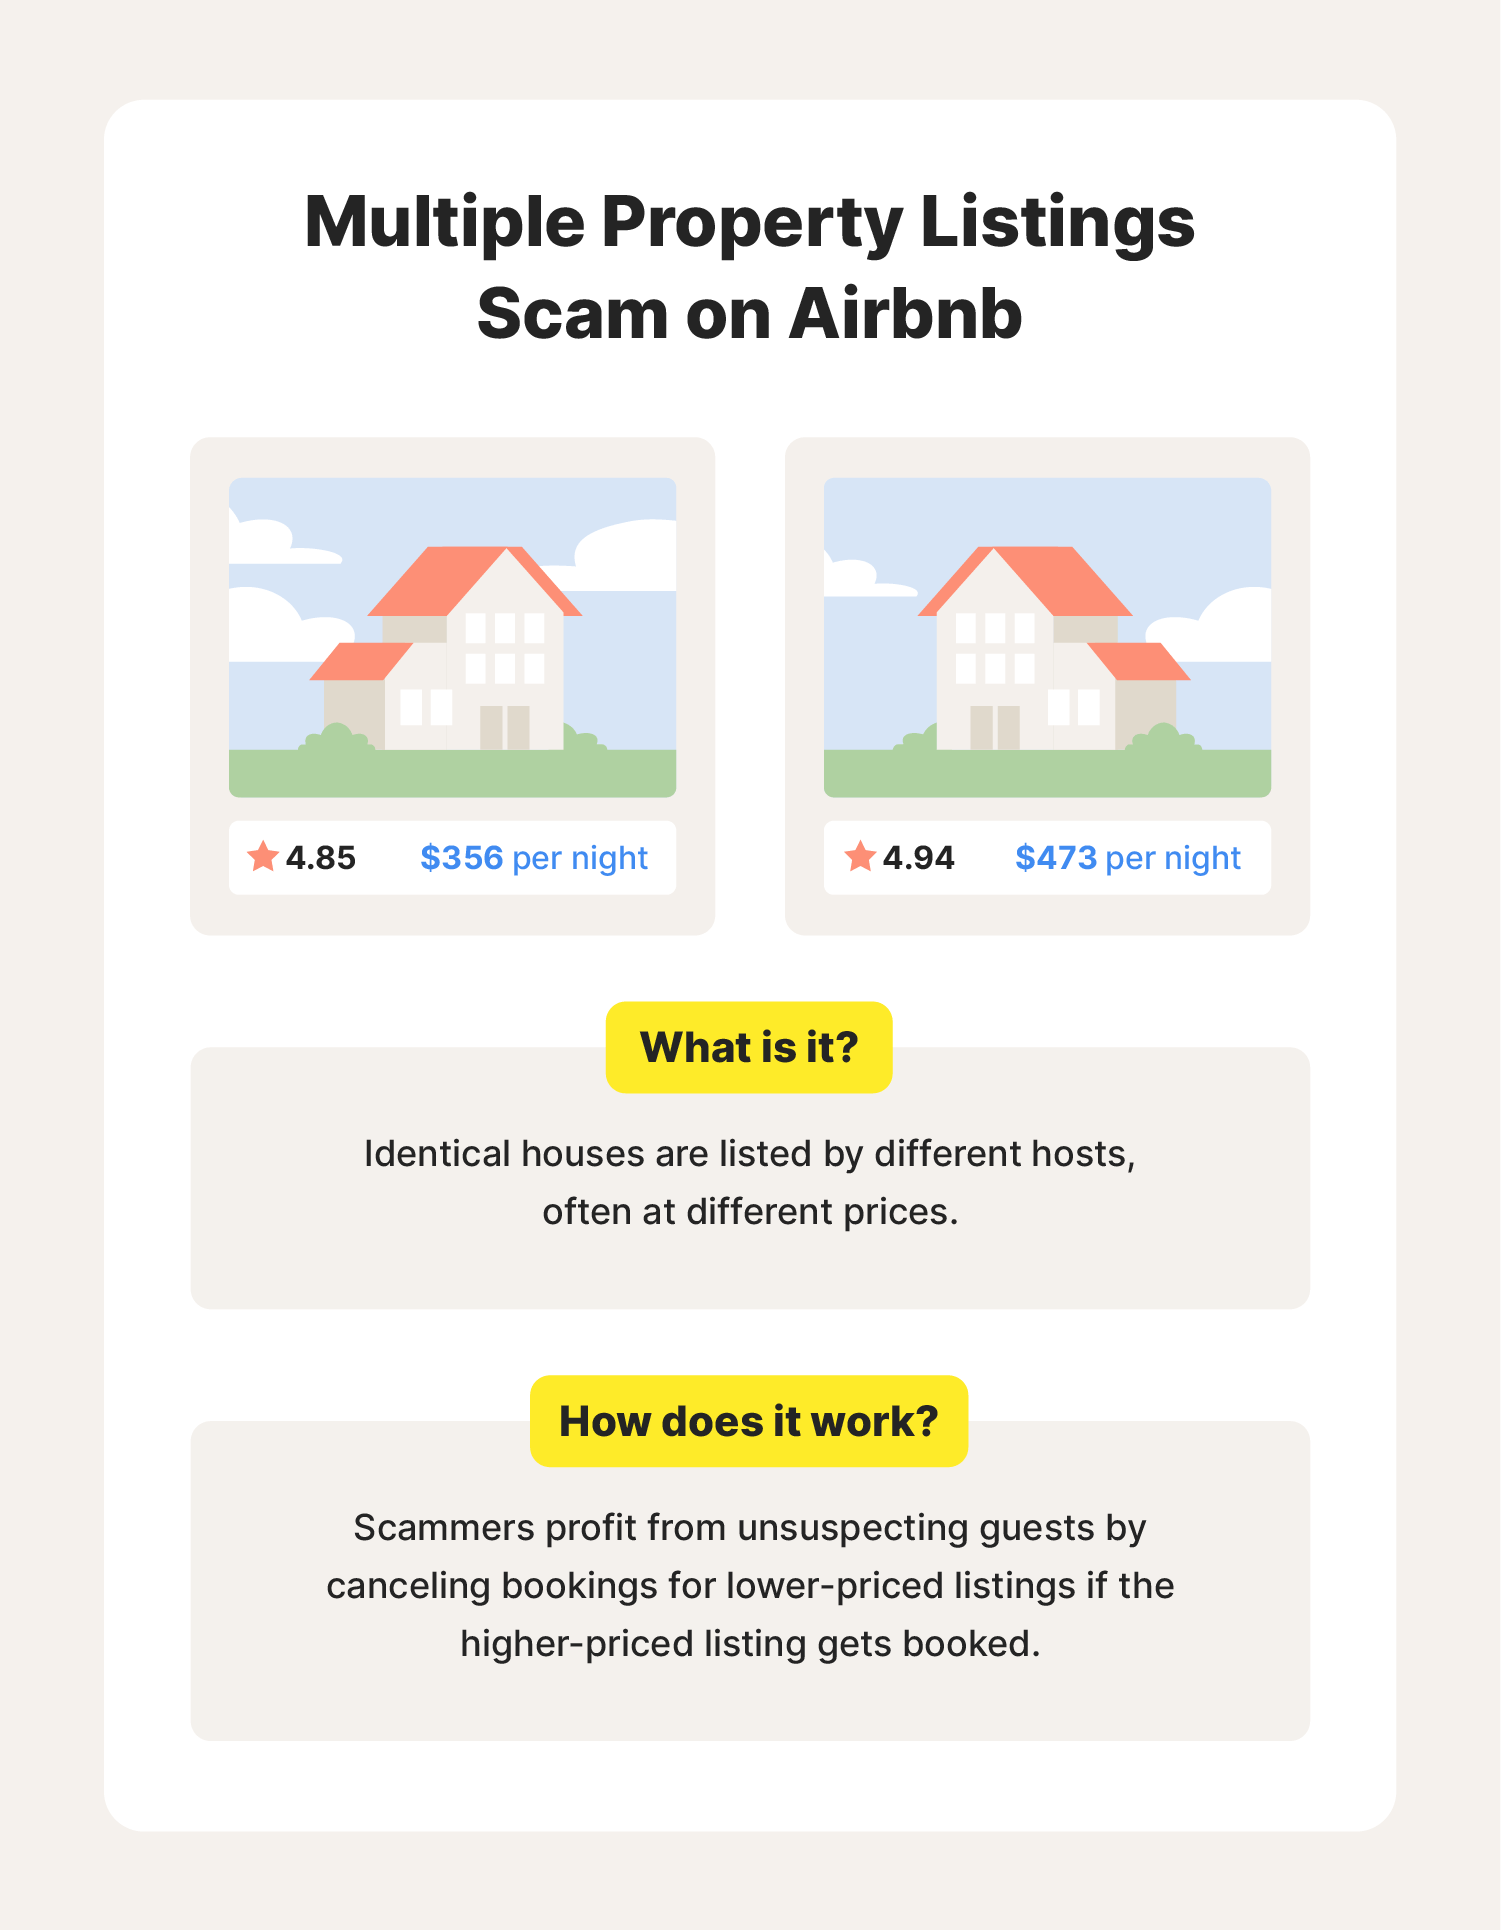 A graphic showcases what a multiple property listings Airbnb scam is and how it works.